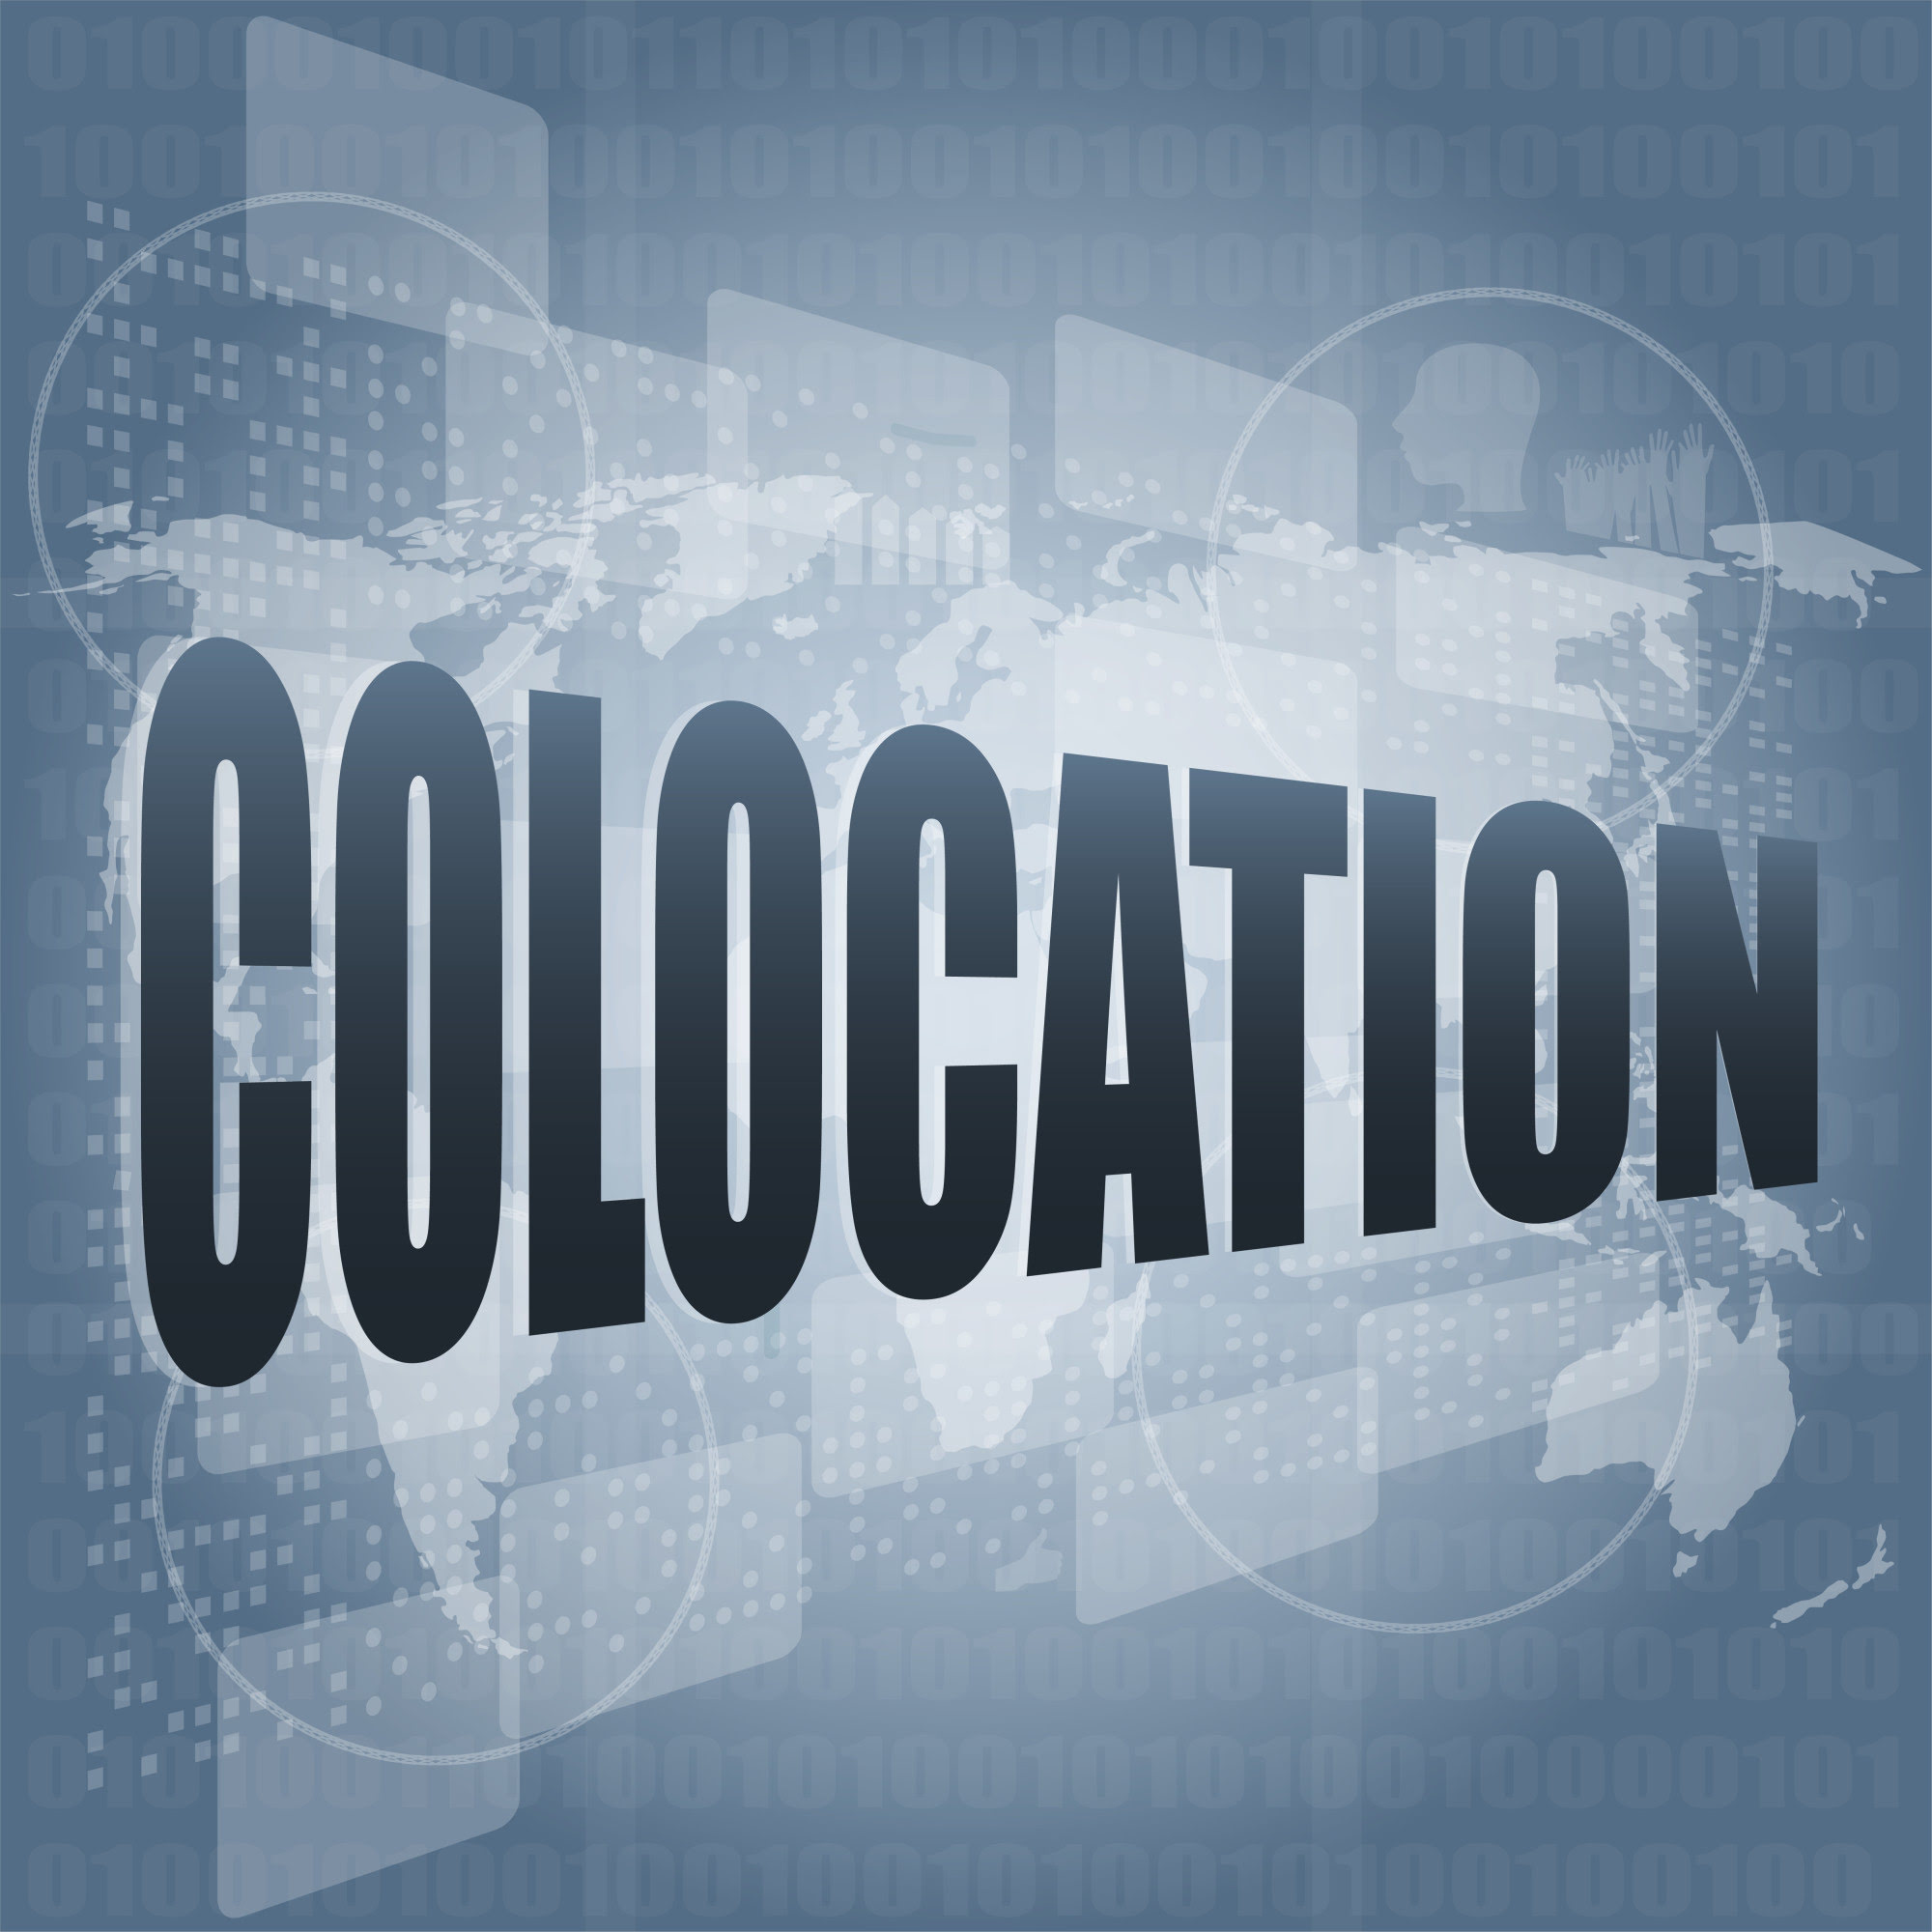 What Are the Pros and Cons of a Colocated Server